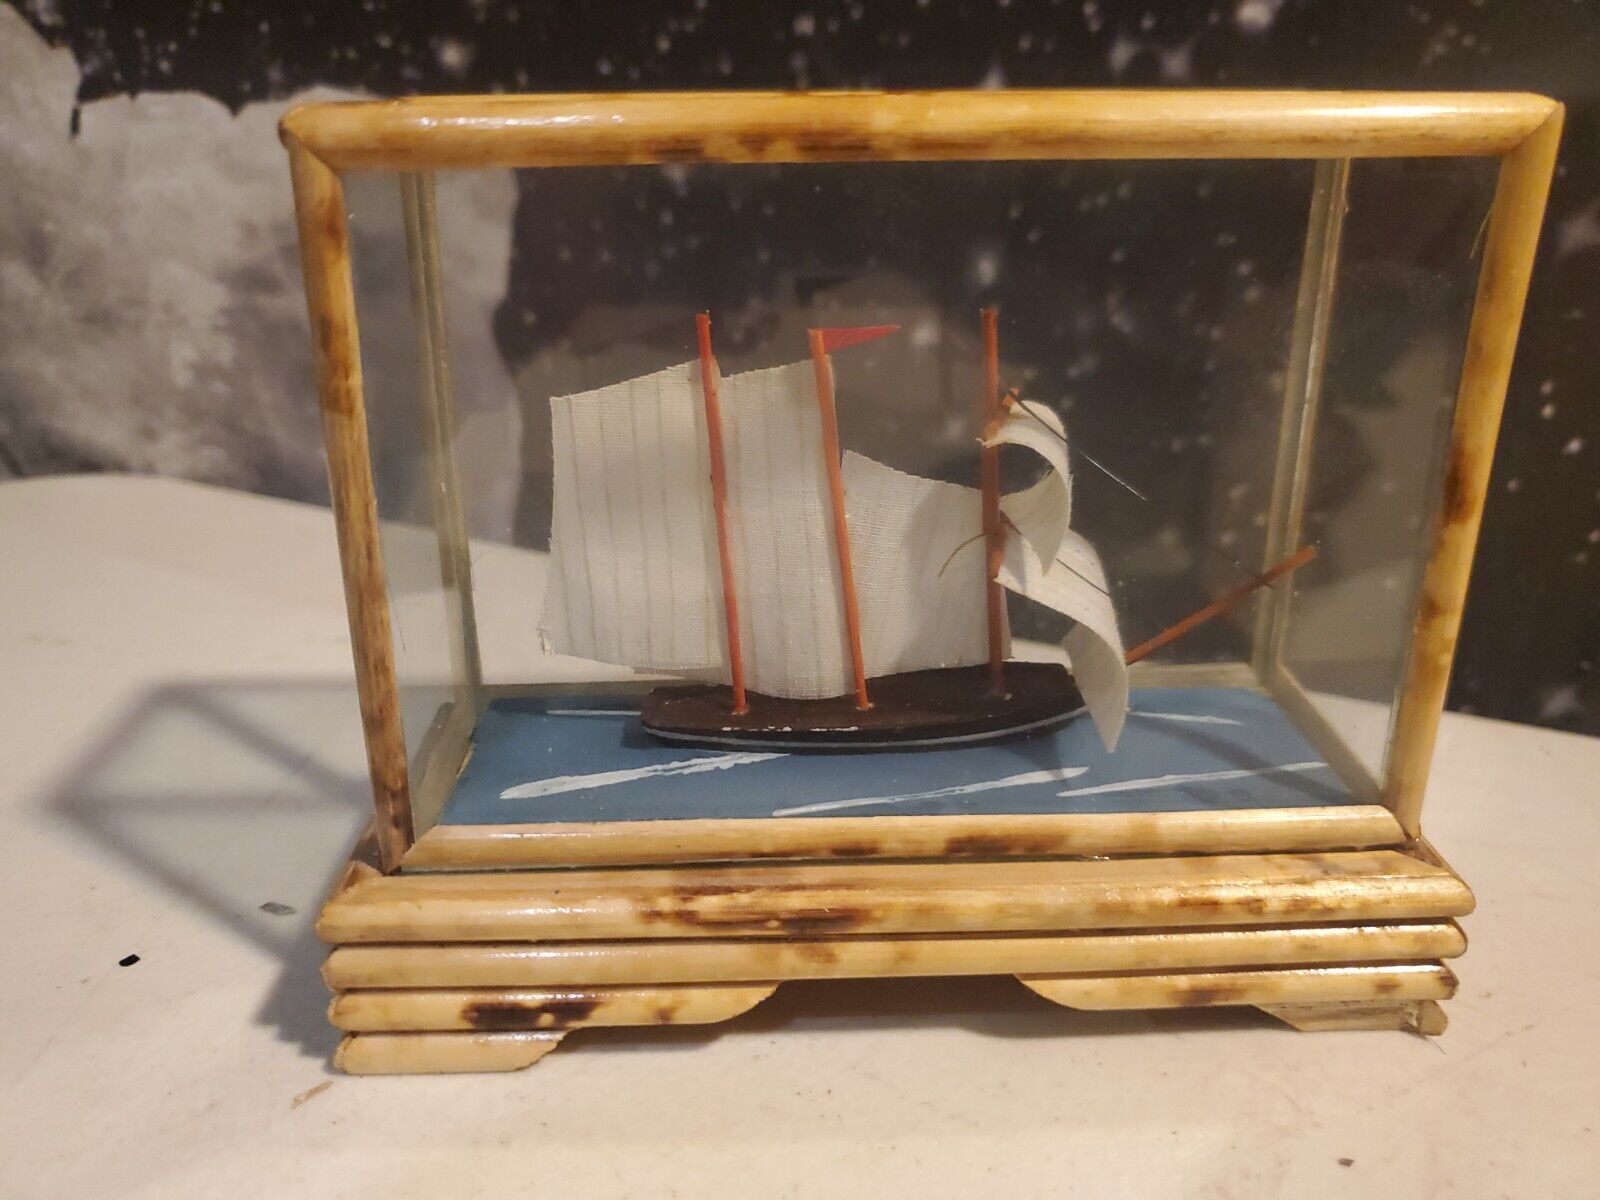 Model Ship Wooden 3D In Handmade Glass and Wood Display Box 5x4x2